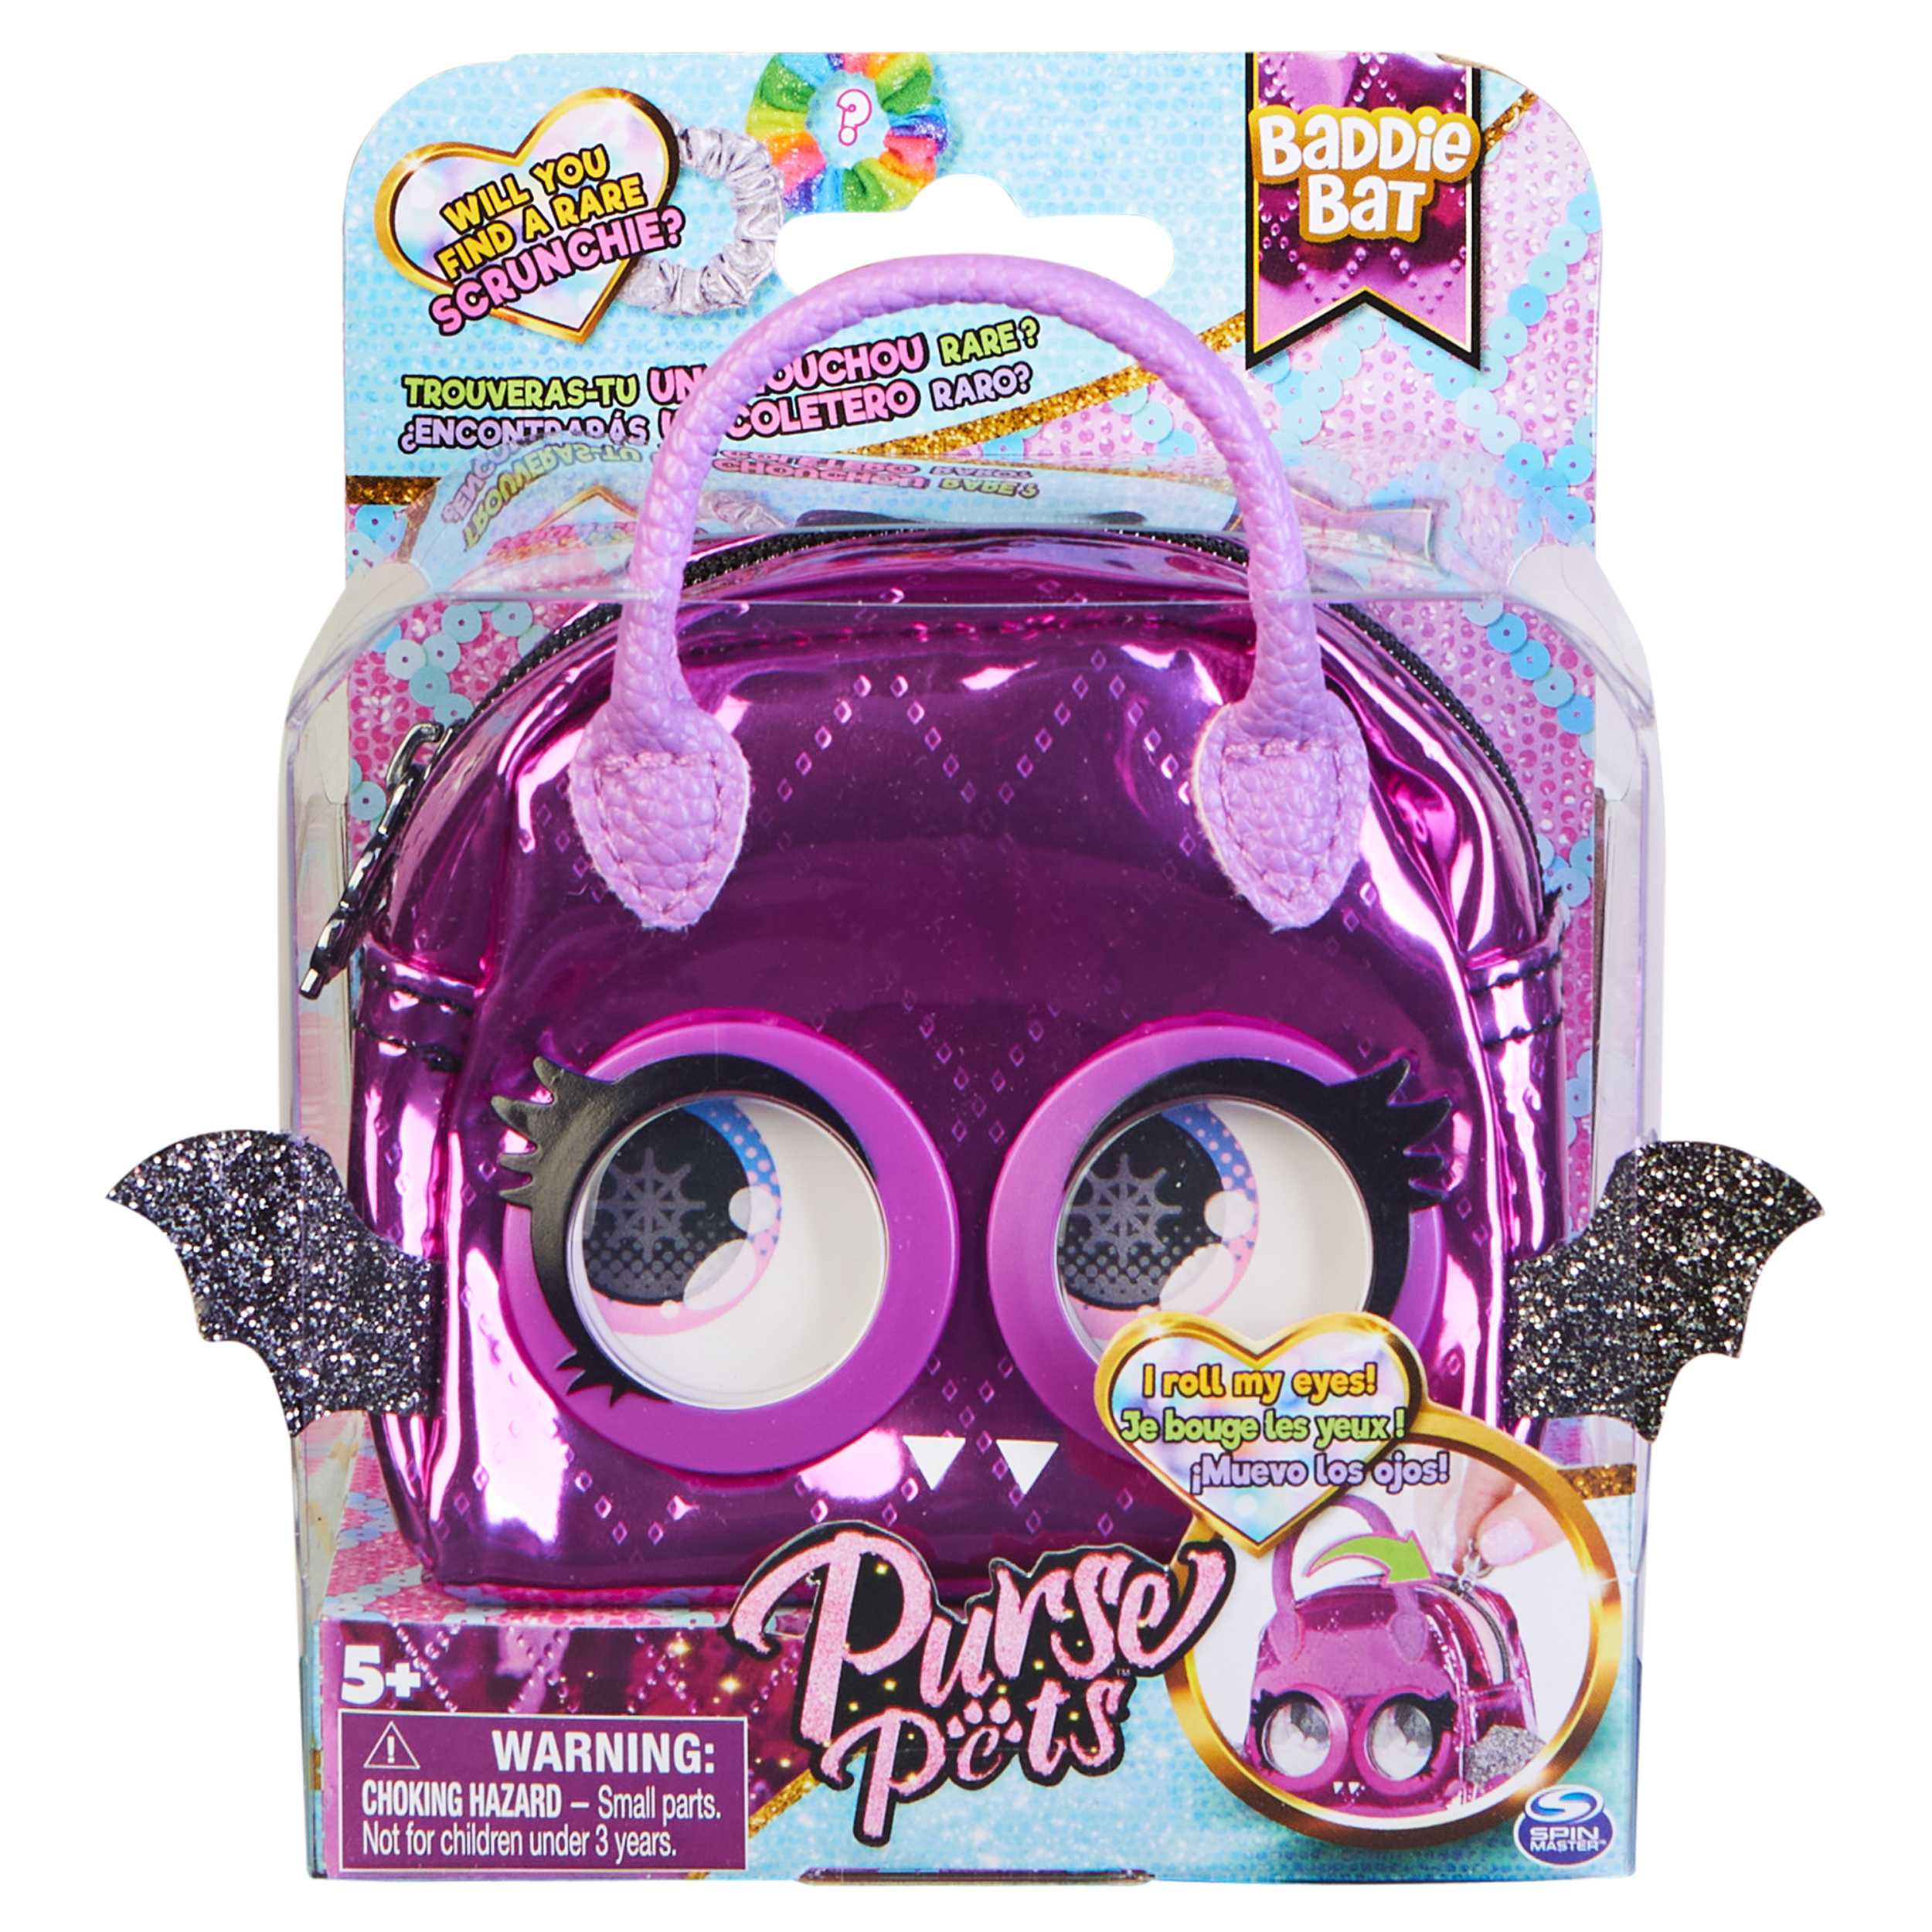 Purse Pets Micros, Baddie Bat Stylish Small Purse with Eye Roll Feature,  Kids Toys for Girls Aged 5 and up